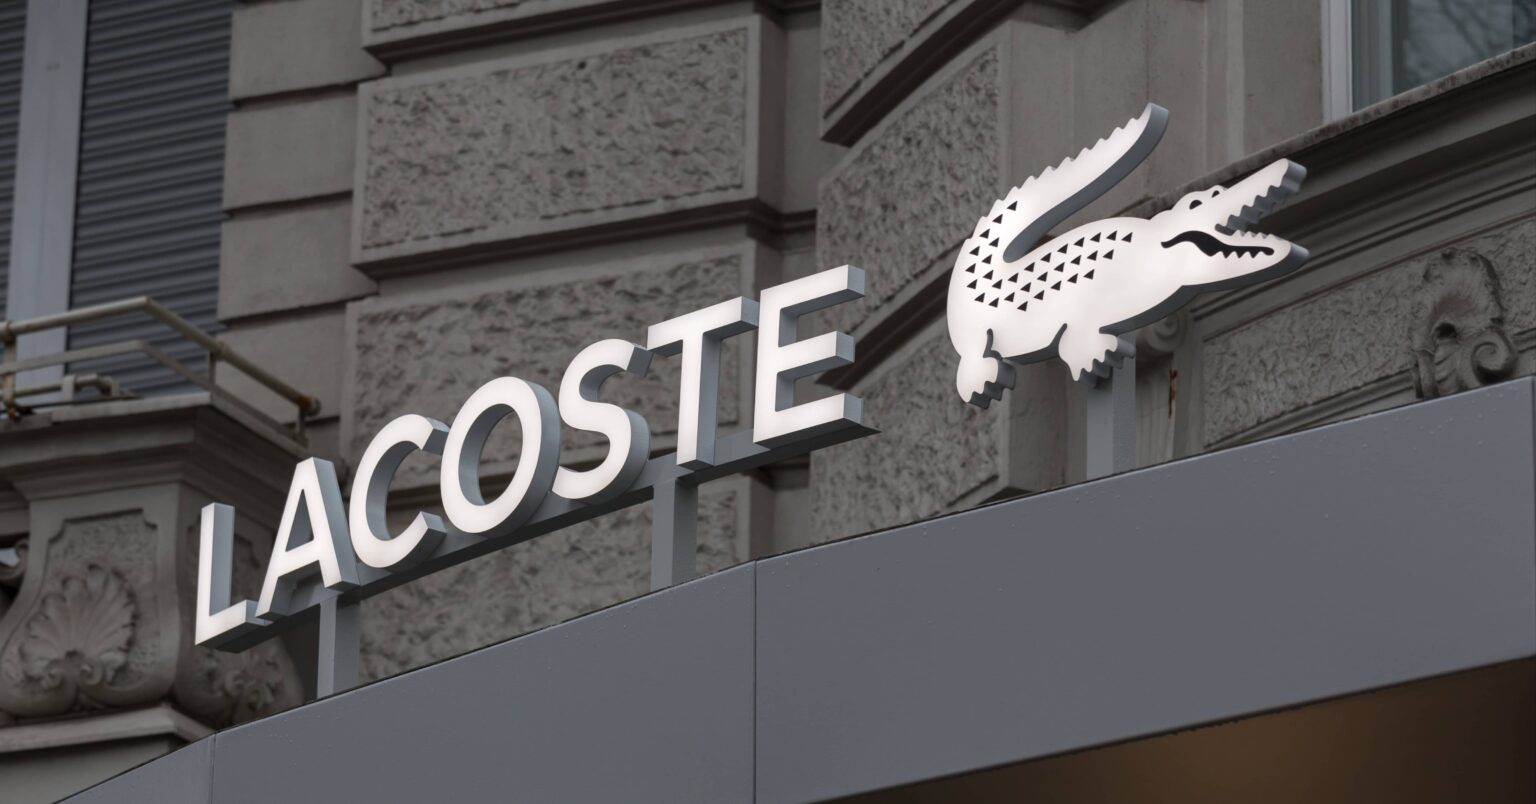 History, Origins and Success Factors of Lacoste